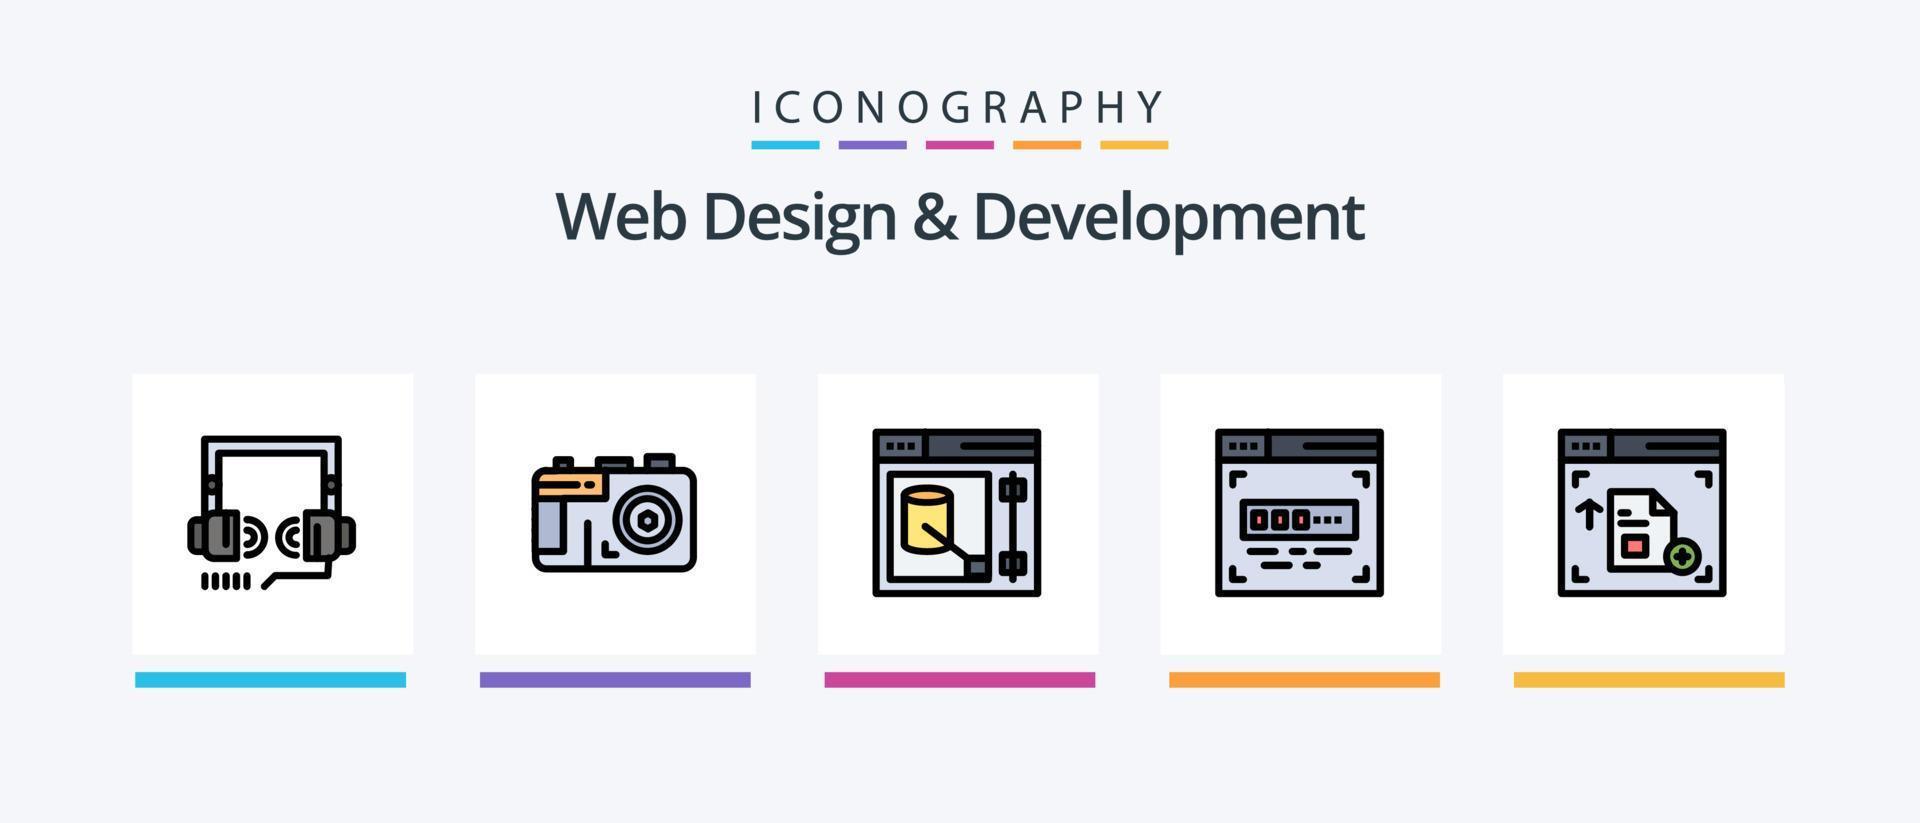 Web Design And Development Line Filled 5 Icon Pack Including interface . graphic. graphic design .. Creative Icons Design vector